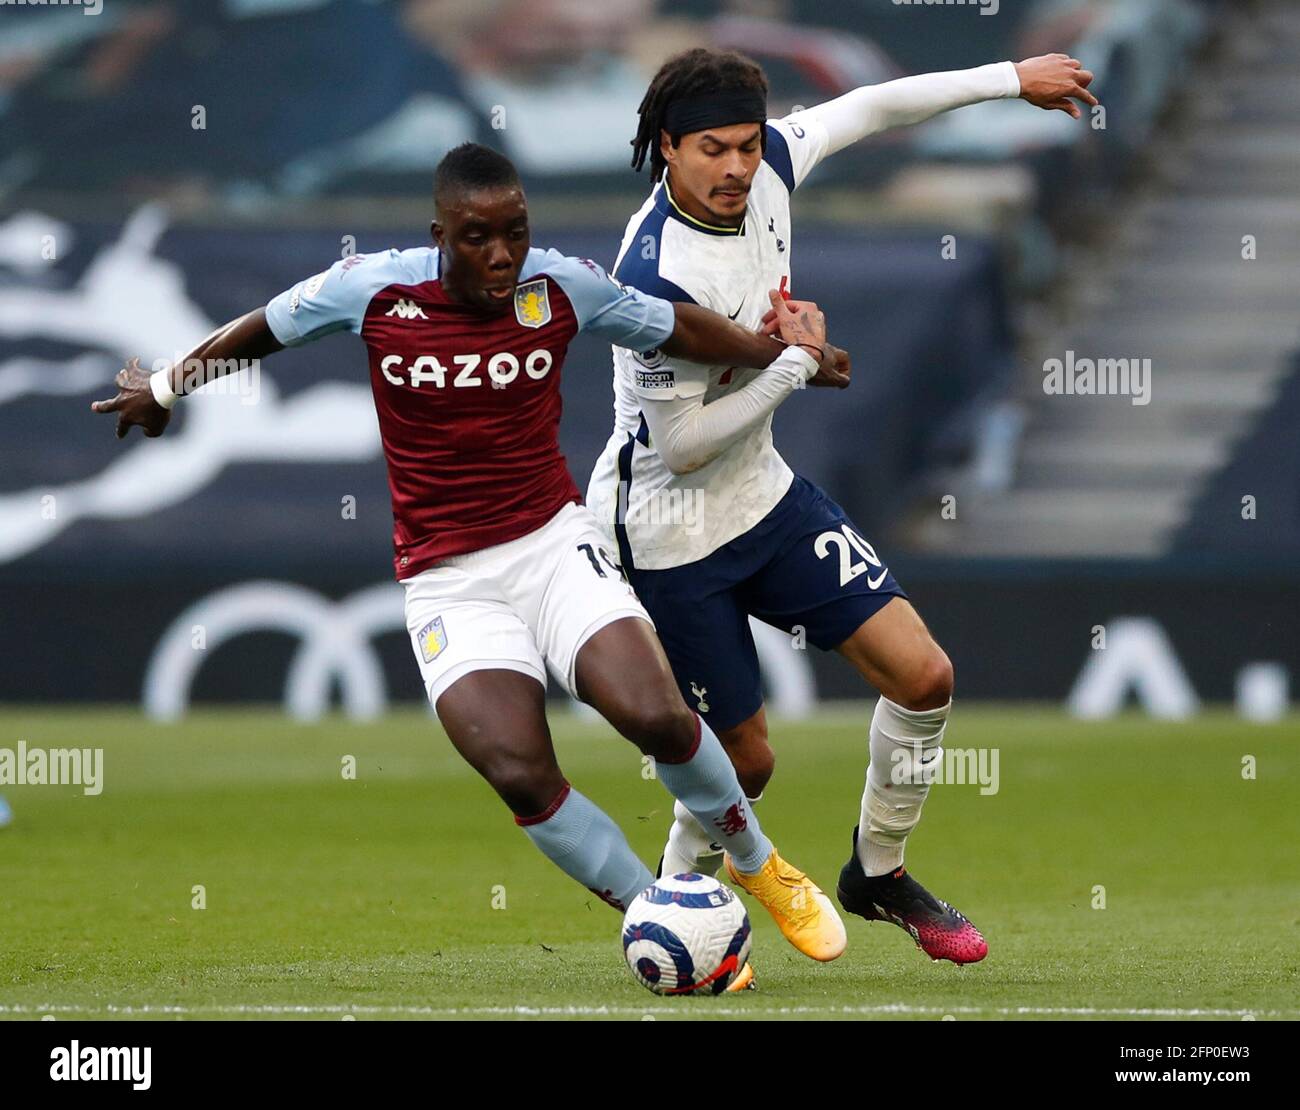 Aston Villa's Marvelous Nakamba (left) and Tottenham Hotspur's Dele Alli battle for the ball during the Premier League match at the Tottenham Hotspur Stadium, London. Picture date: Wednesday May 19, 2021. Stock Photo